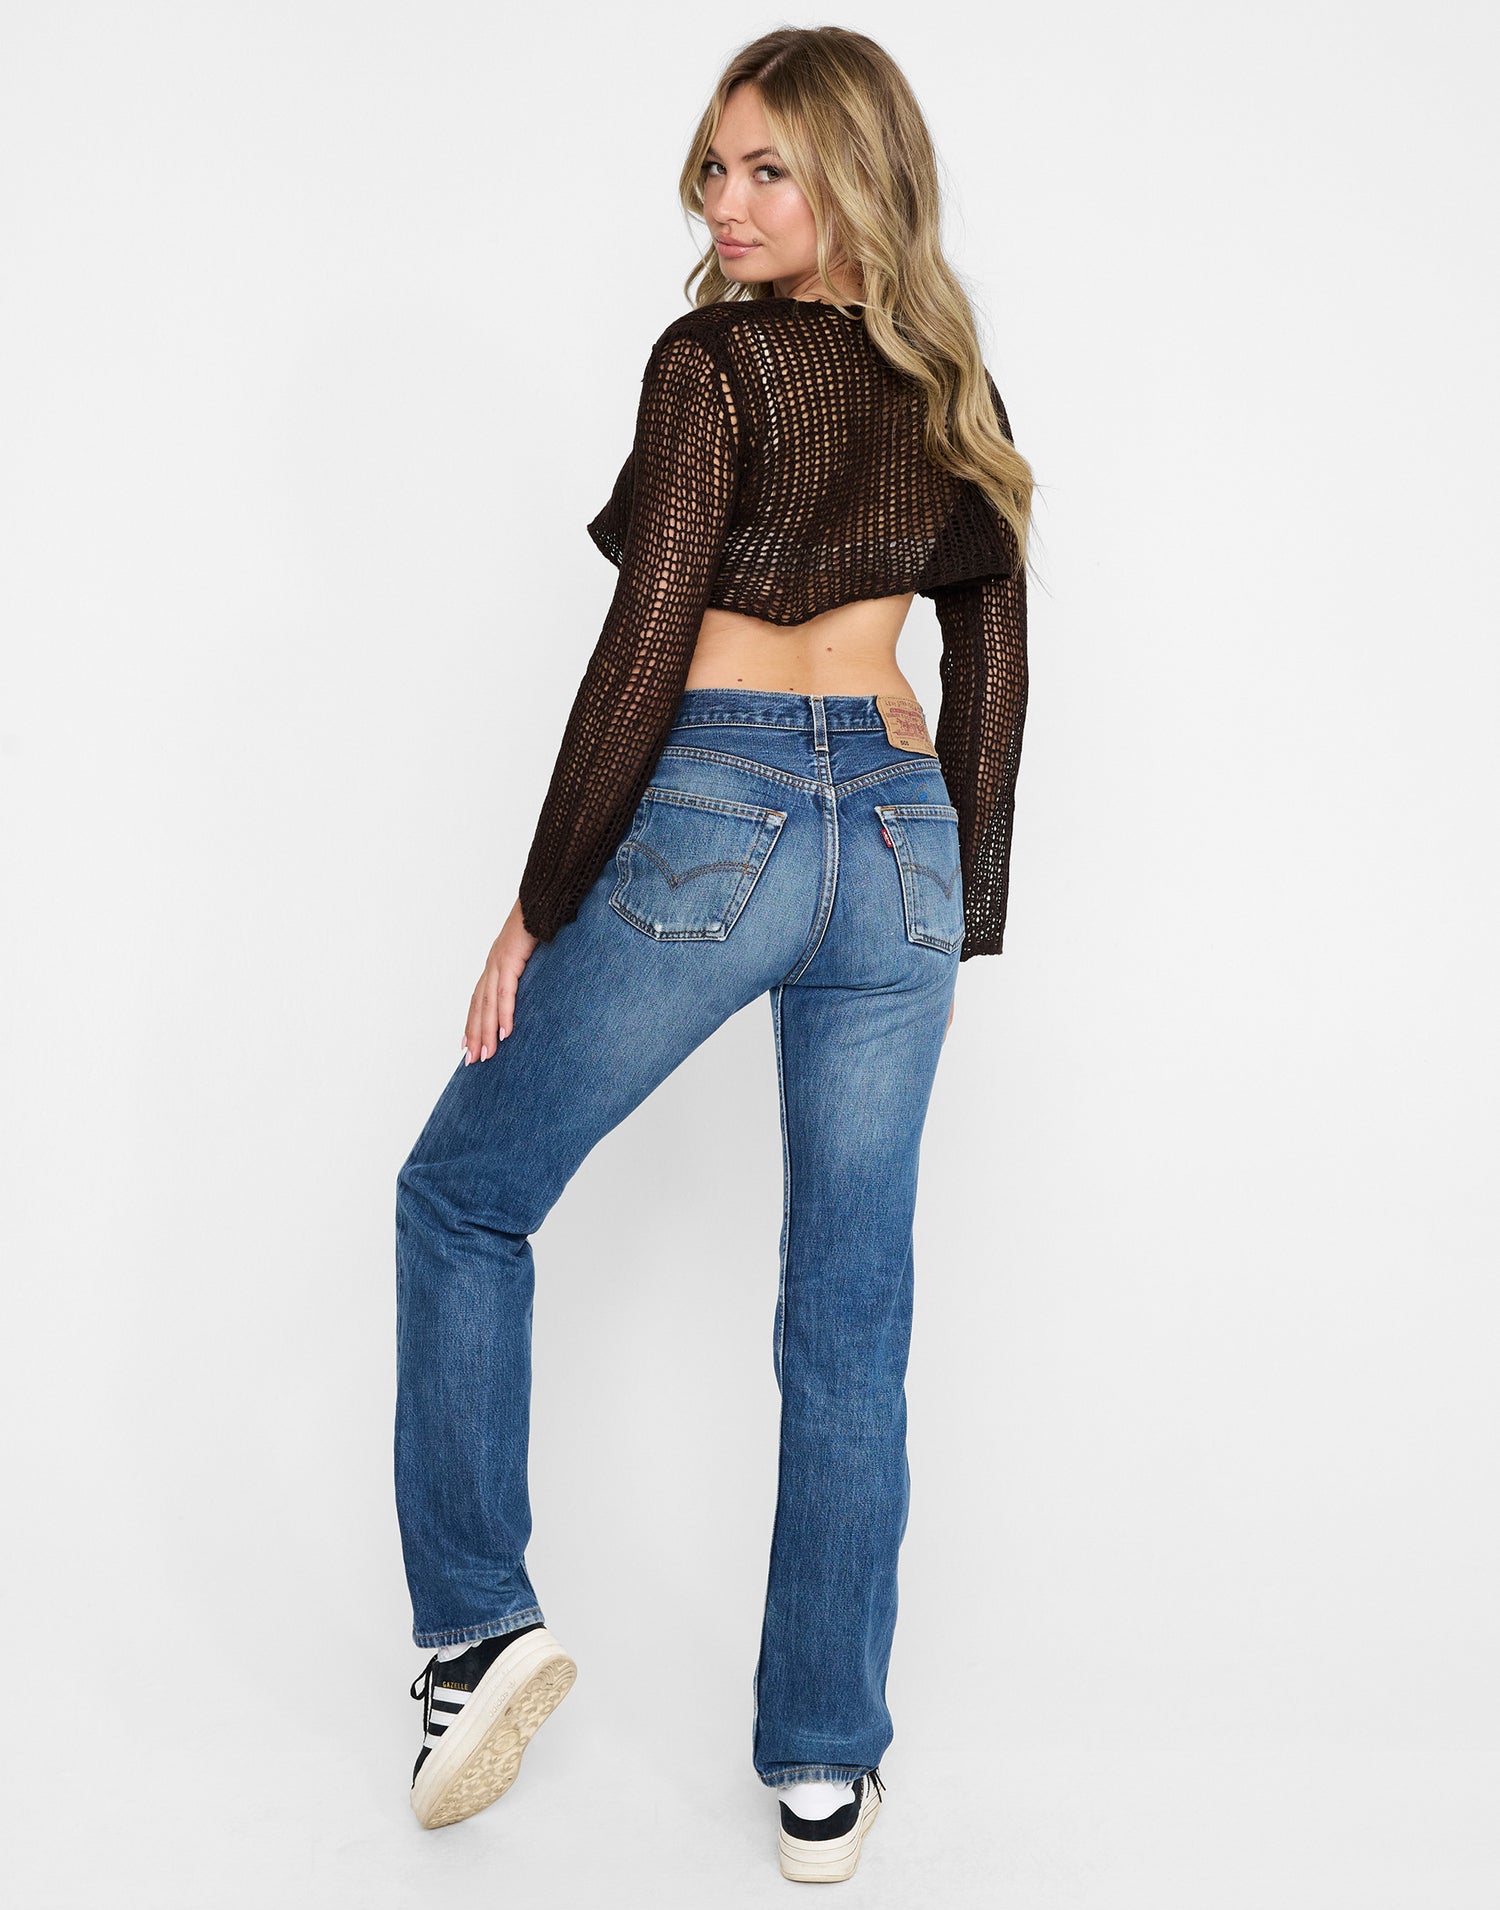 Kennedy Crochet Cropped Sweater by Summer Haus in Brown - Back View